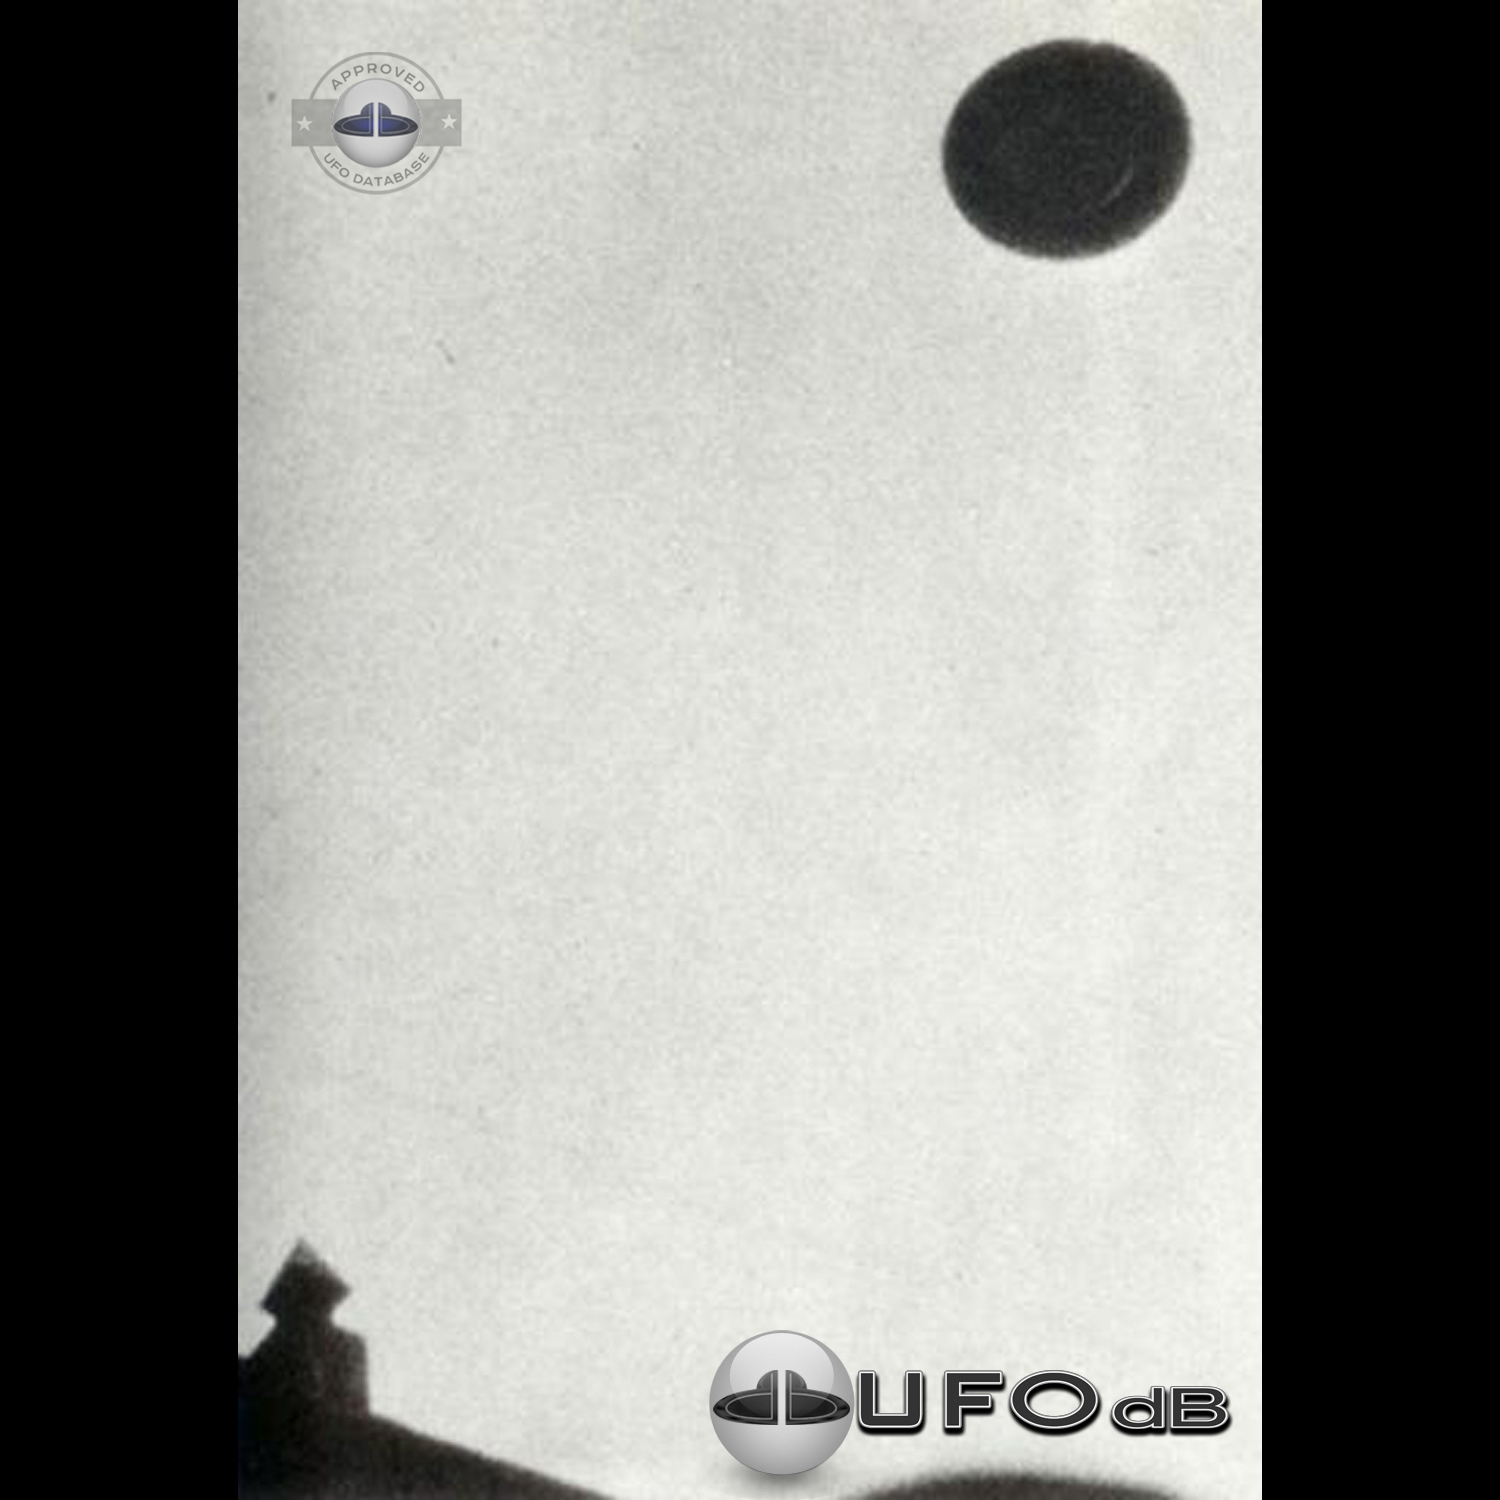 Round UFO over the chimney of an unknown building - 1950s UFO Picture UFO Picture #107-1